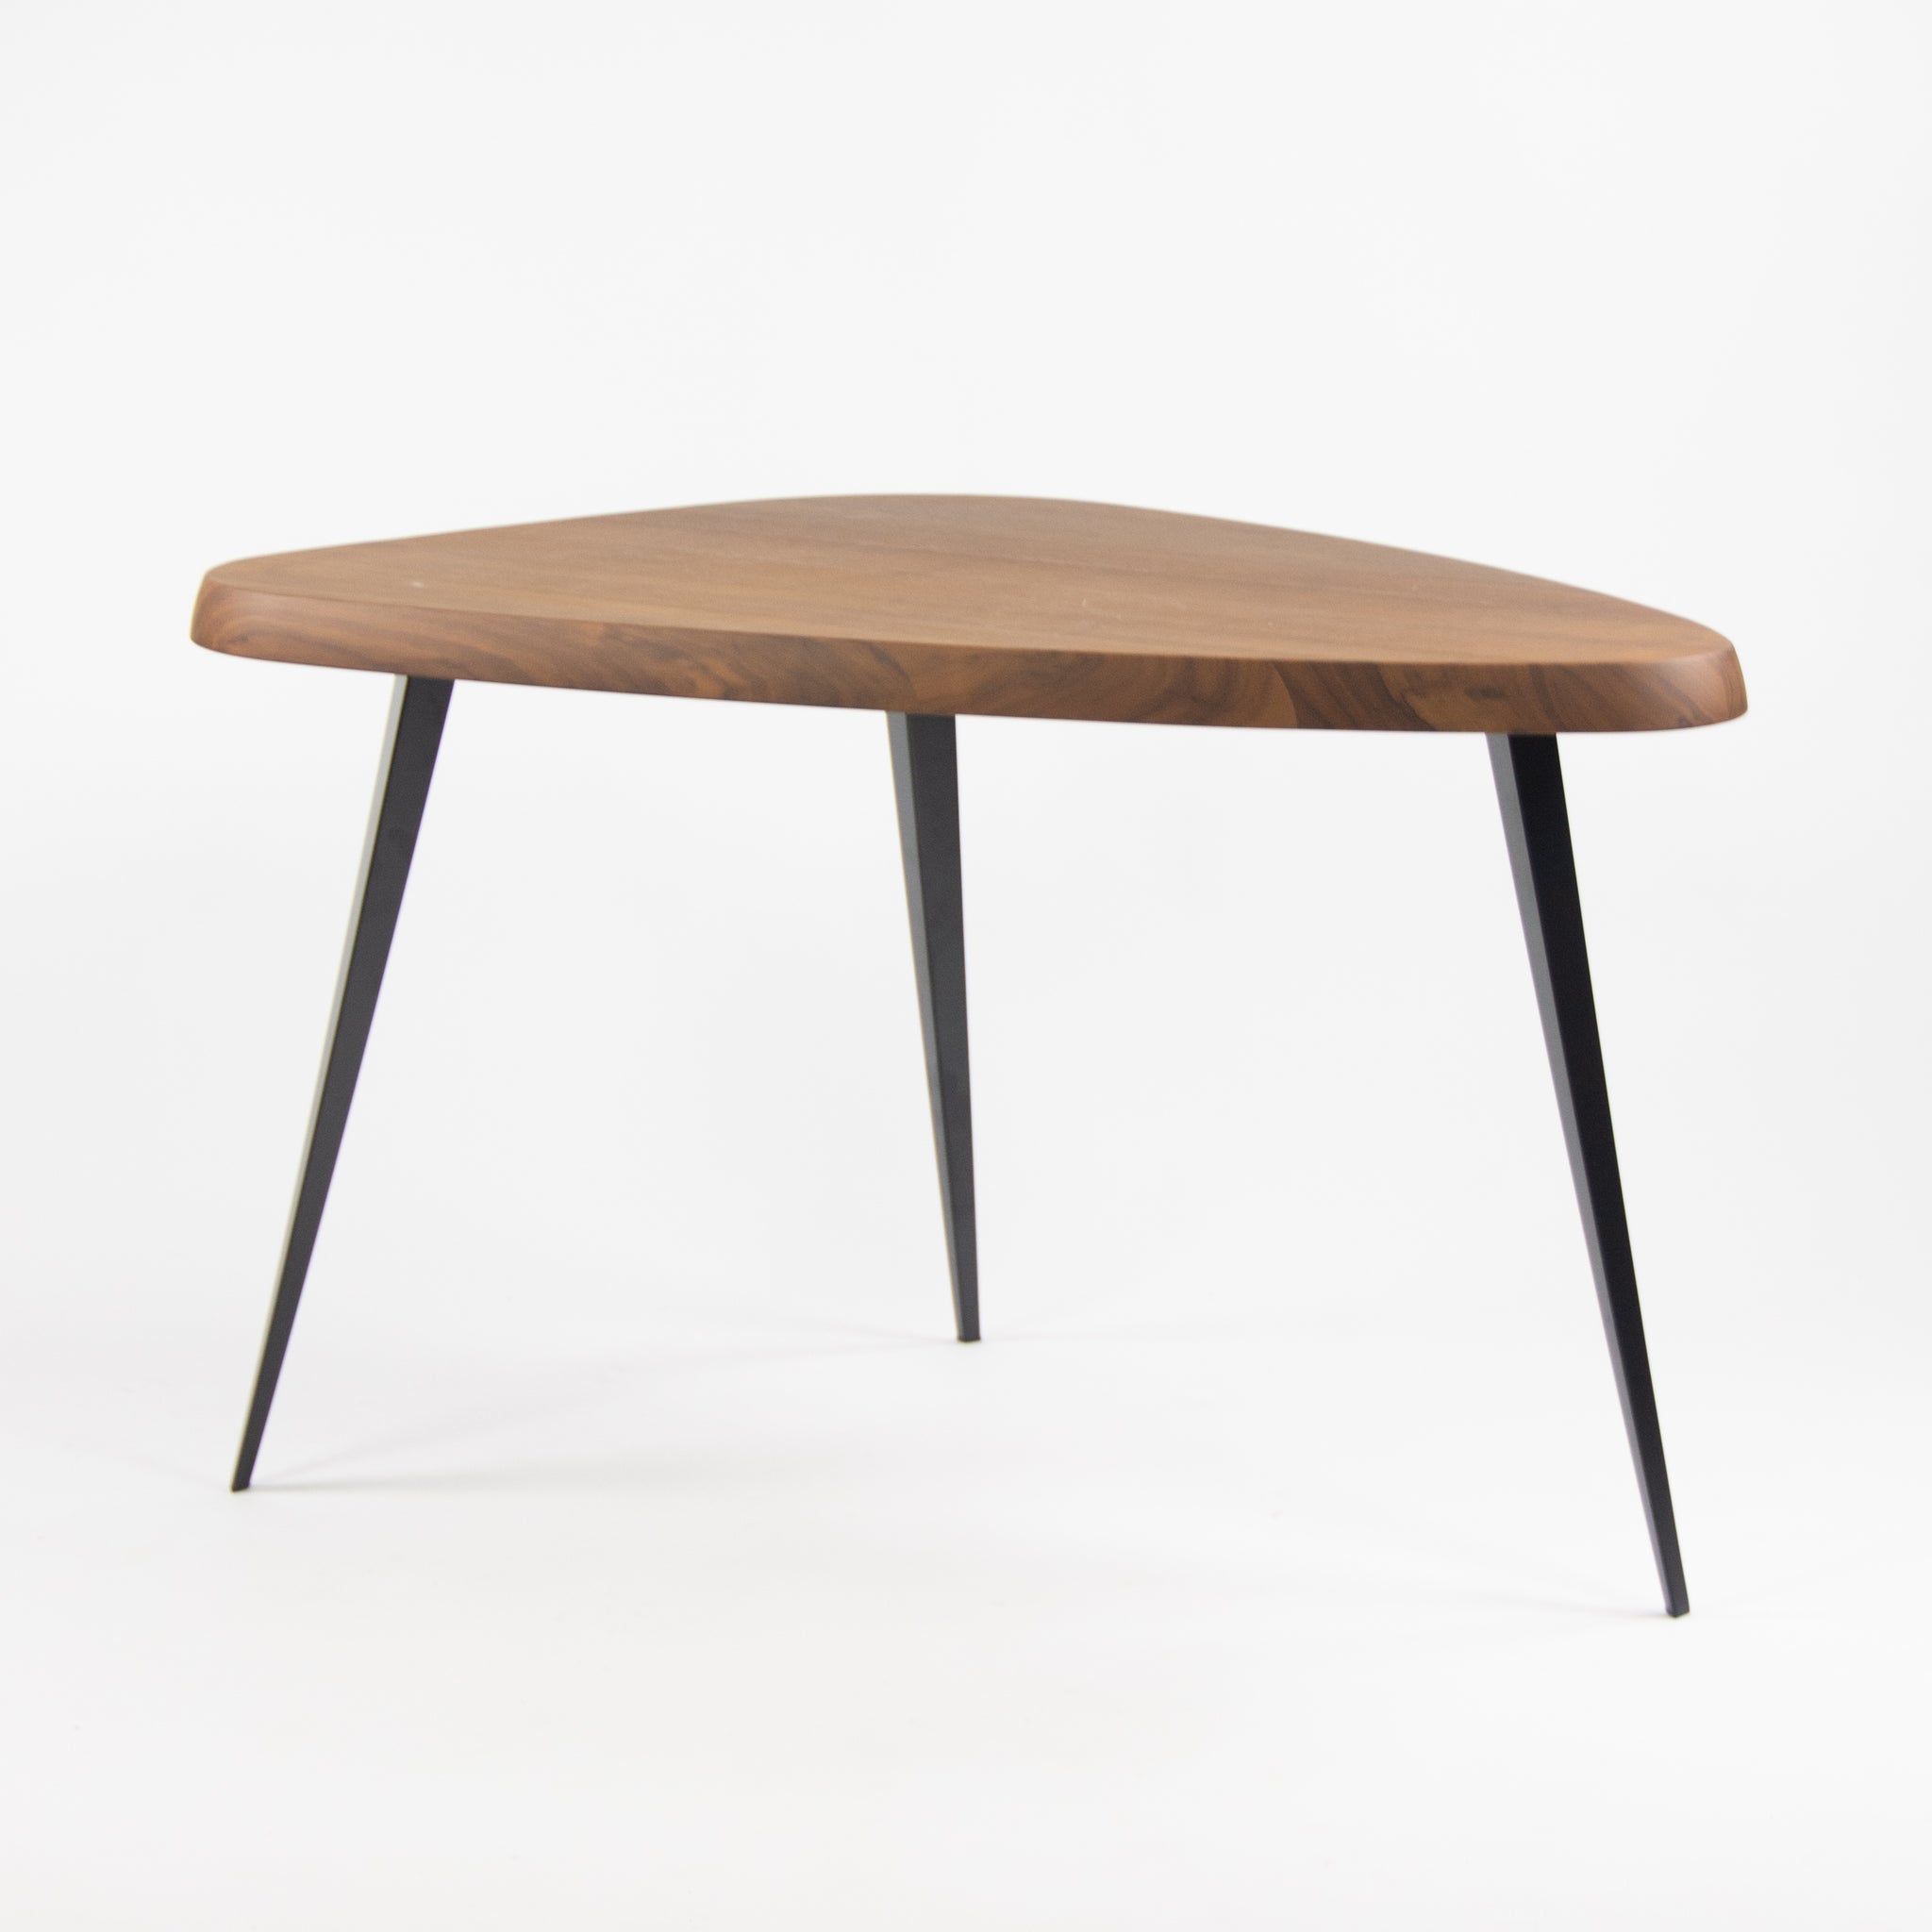 SOLD Charlotte Perriand 527 2 Mexique Dining Table by Cassina Italy